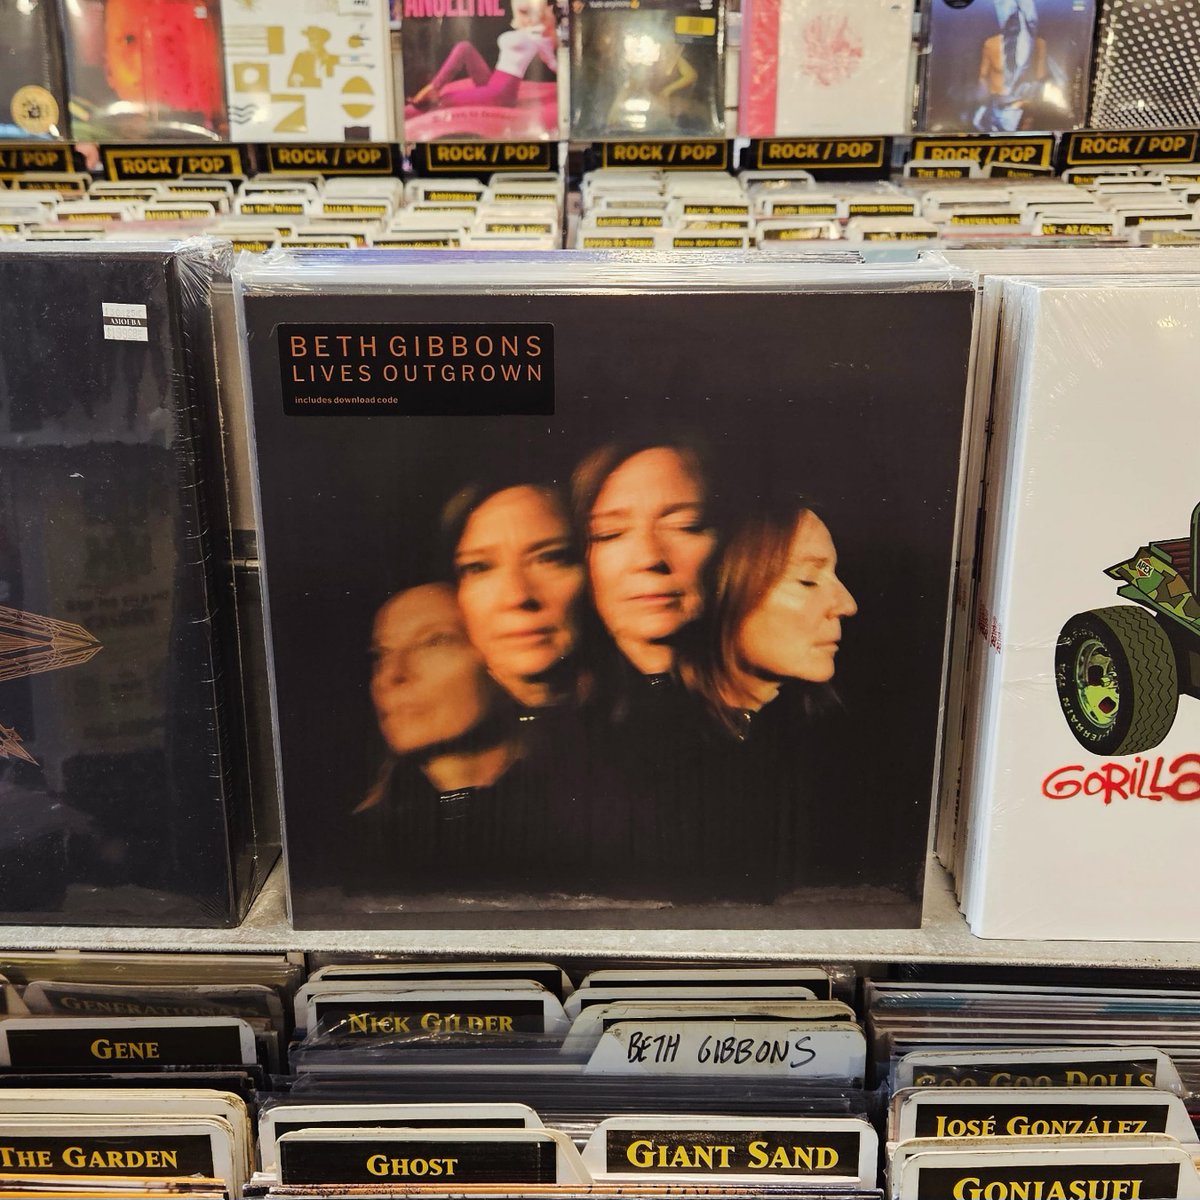 .@realbethgibbons of @Portisheadinfo just released a new solo album! Her voice has exceptional power and the arrangements are layered, haunting, and affecting. 'Lives Outgrown' is out now via @Dominorecordco on CD, deluxe CD, and vinyl. Get it here: bit.ly/2UhTqcp